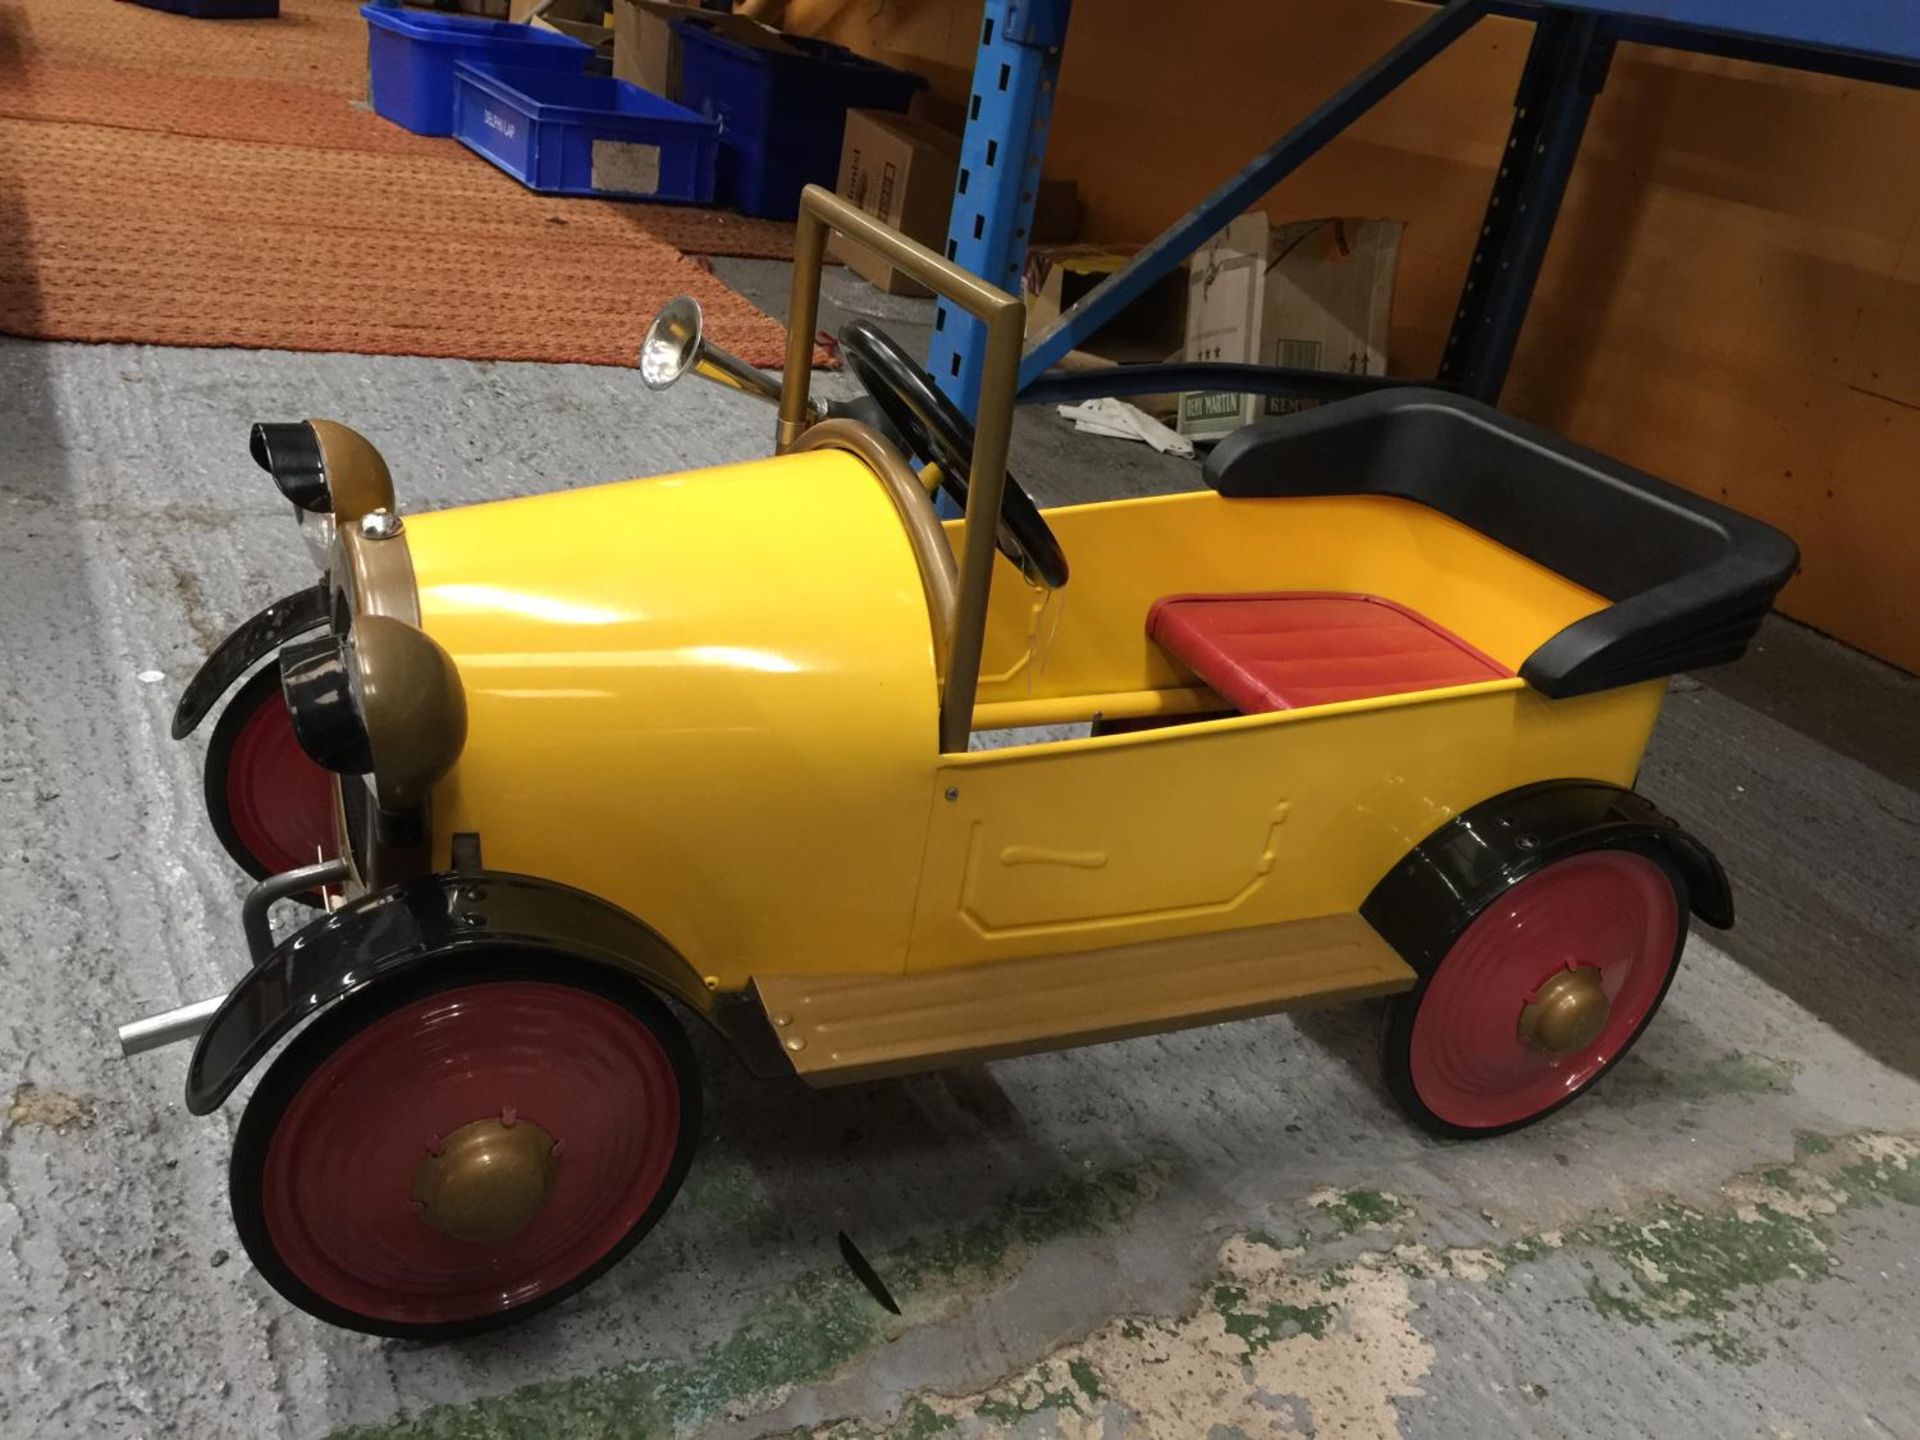 A BRUM PEDAL CAR WITH WORKING HORN AND CRANK HANDLE - Image 3 of 5